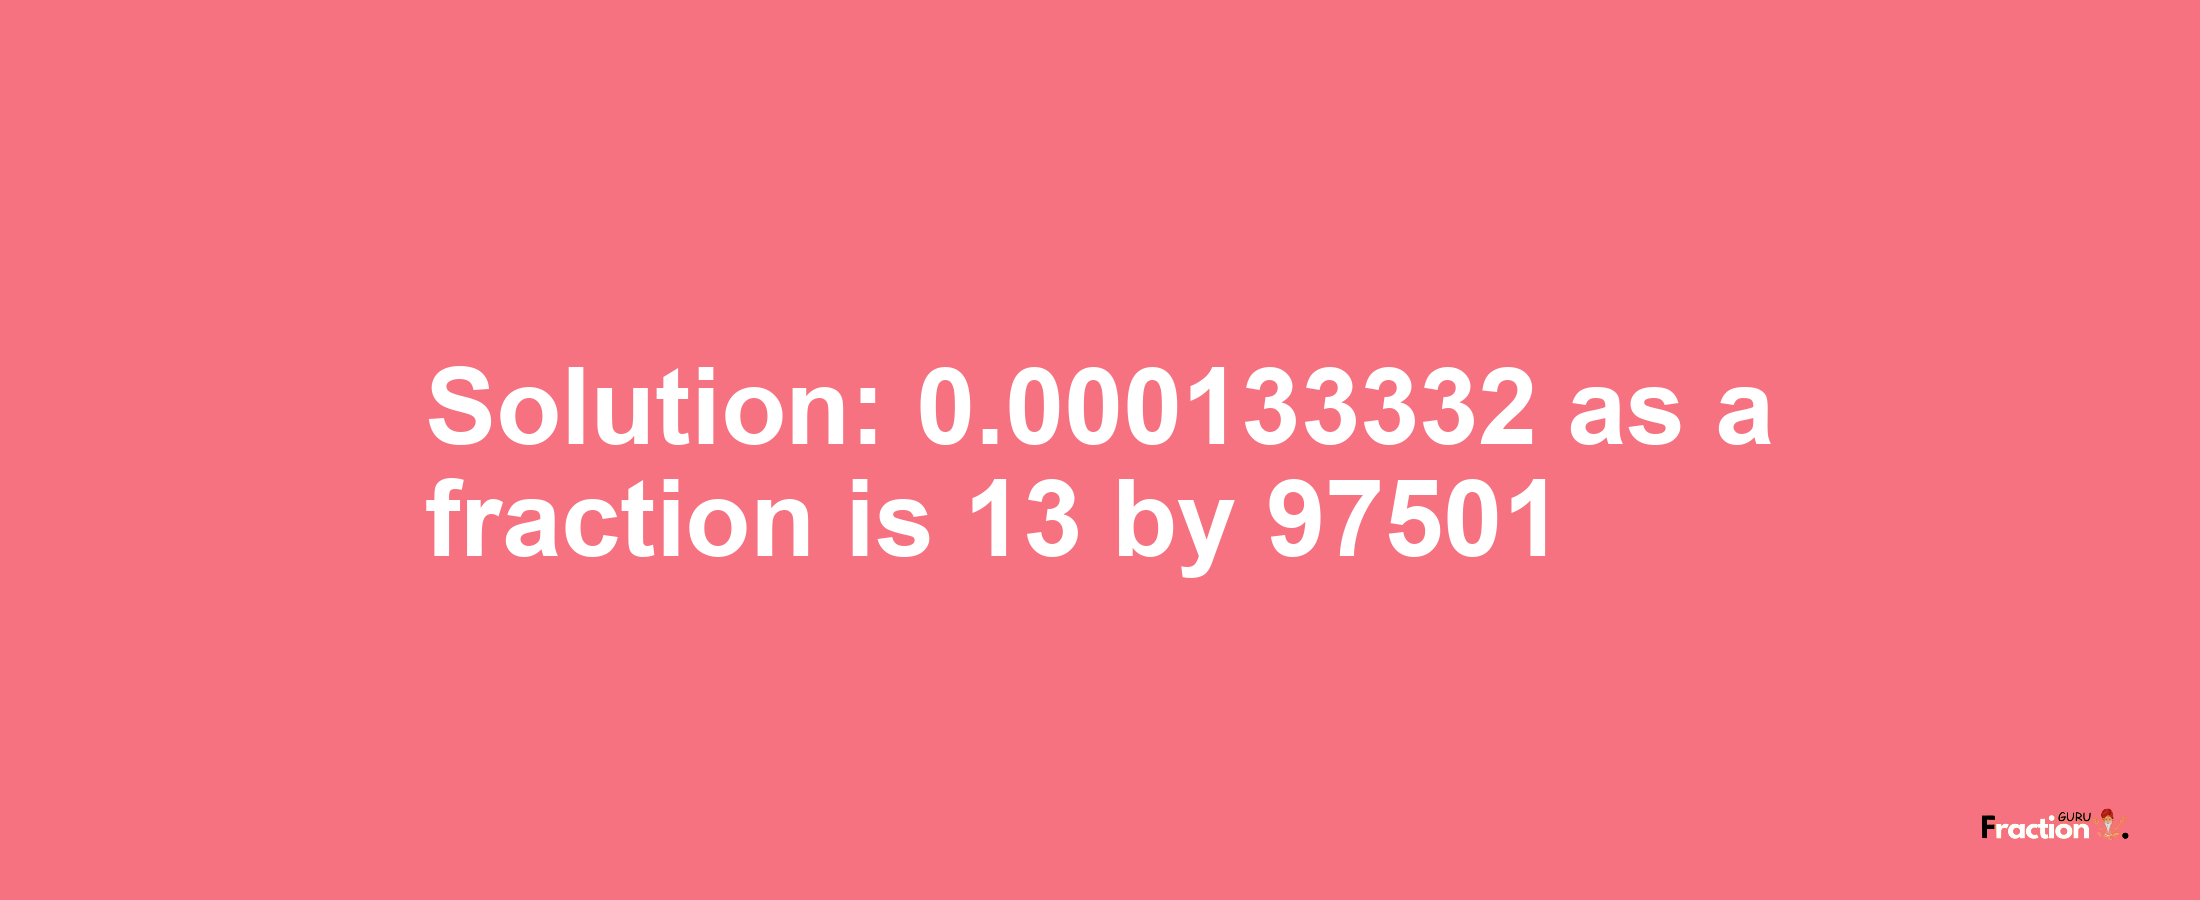 Solution:0.000133332 as a fraction is 13/97501